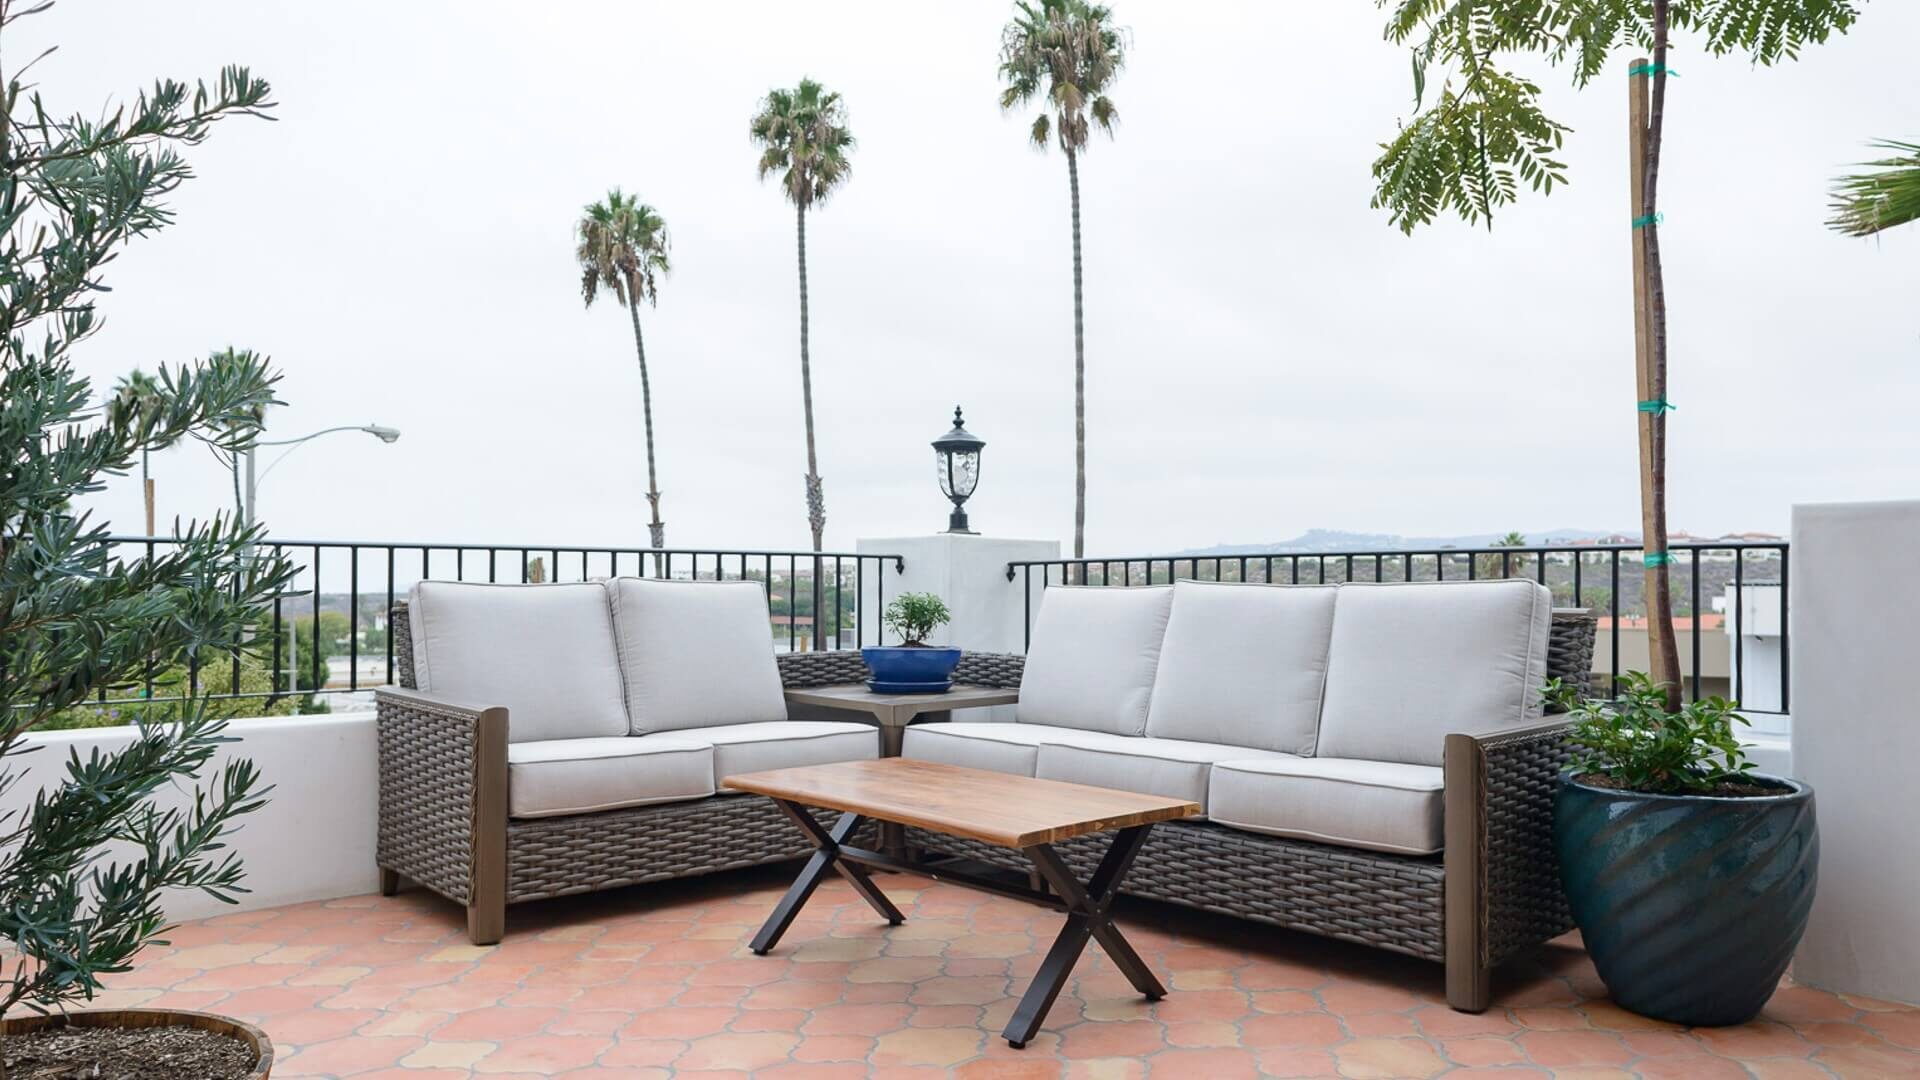 Beautiful outdoor patio with wicker seating, table, black railing and palm trees in the background